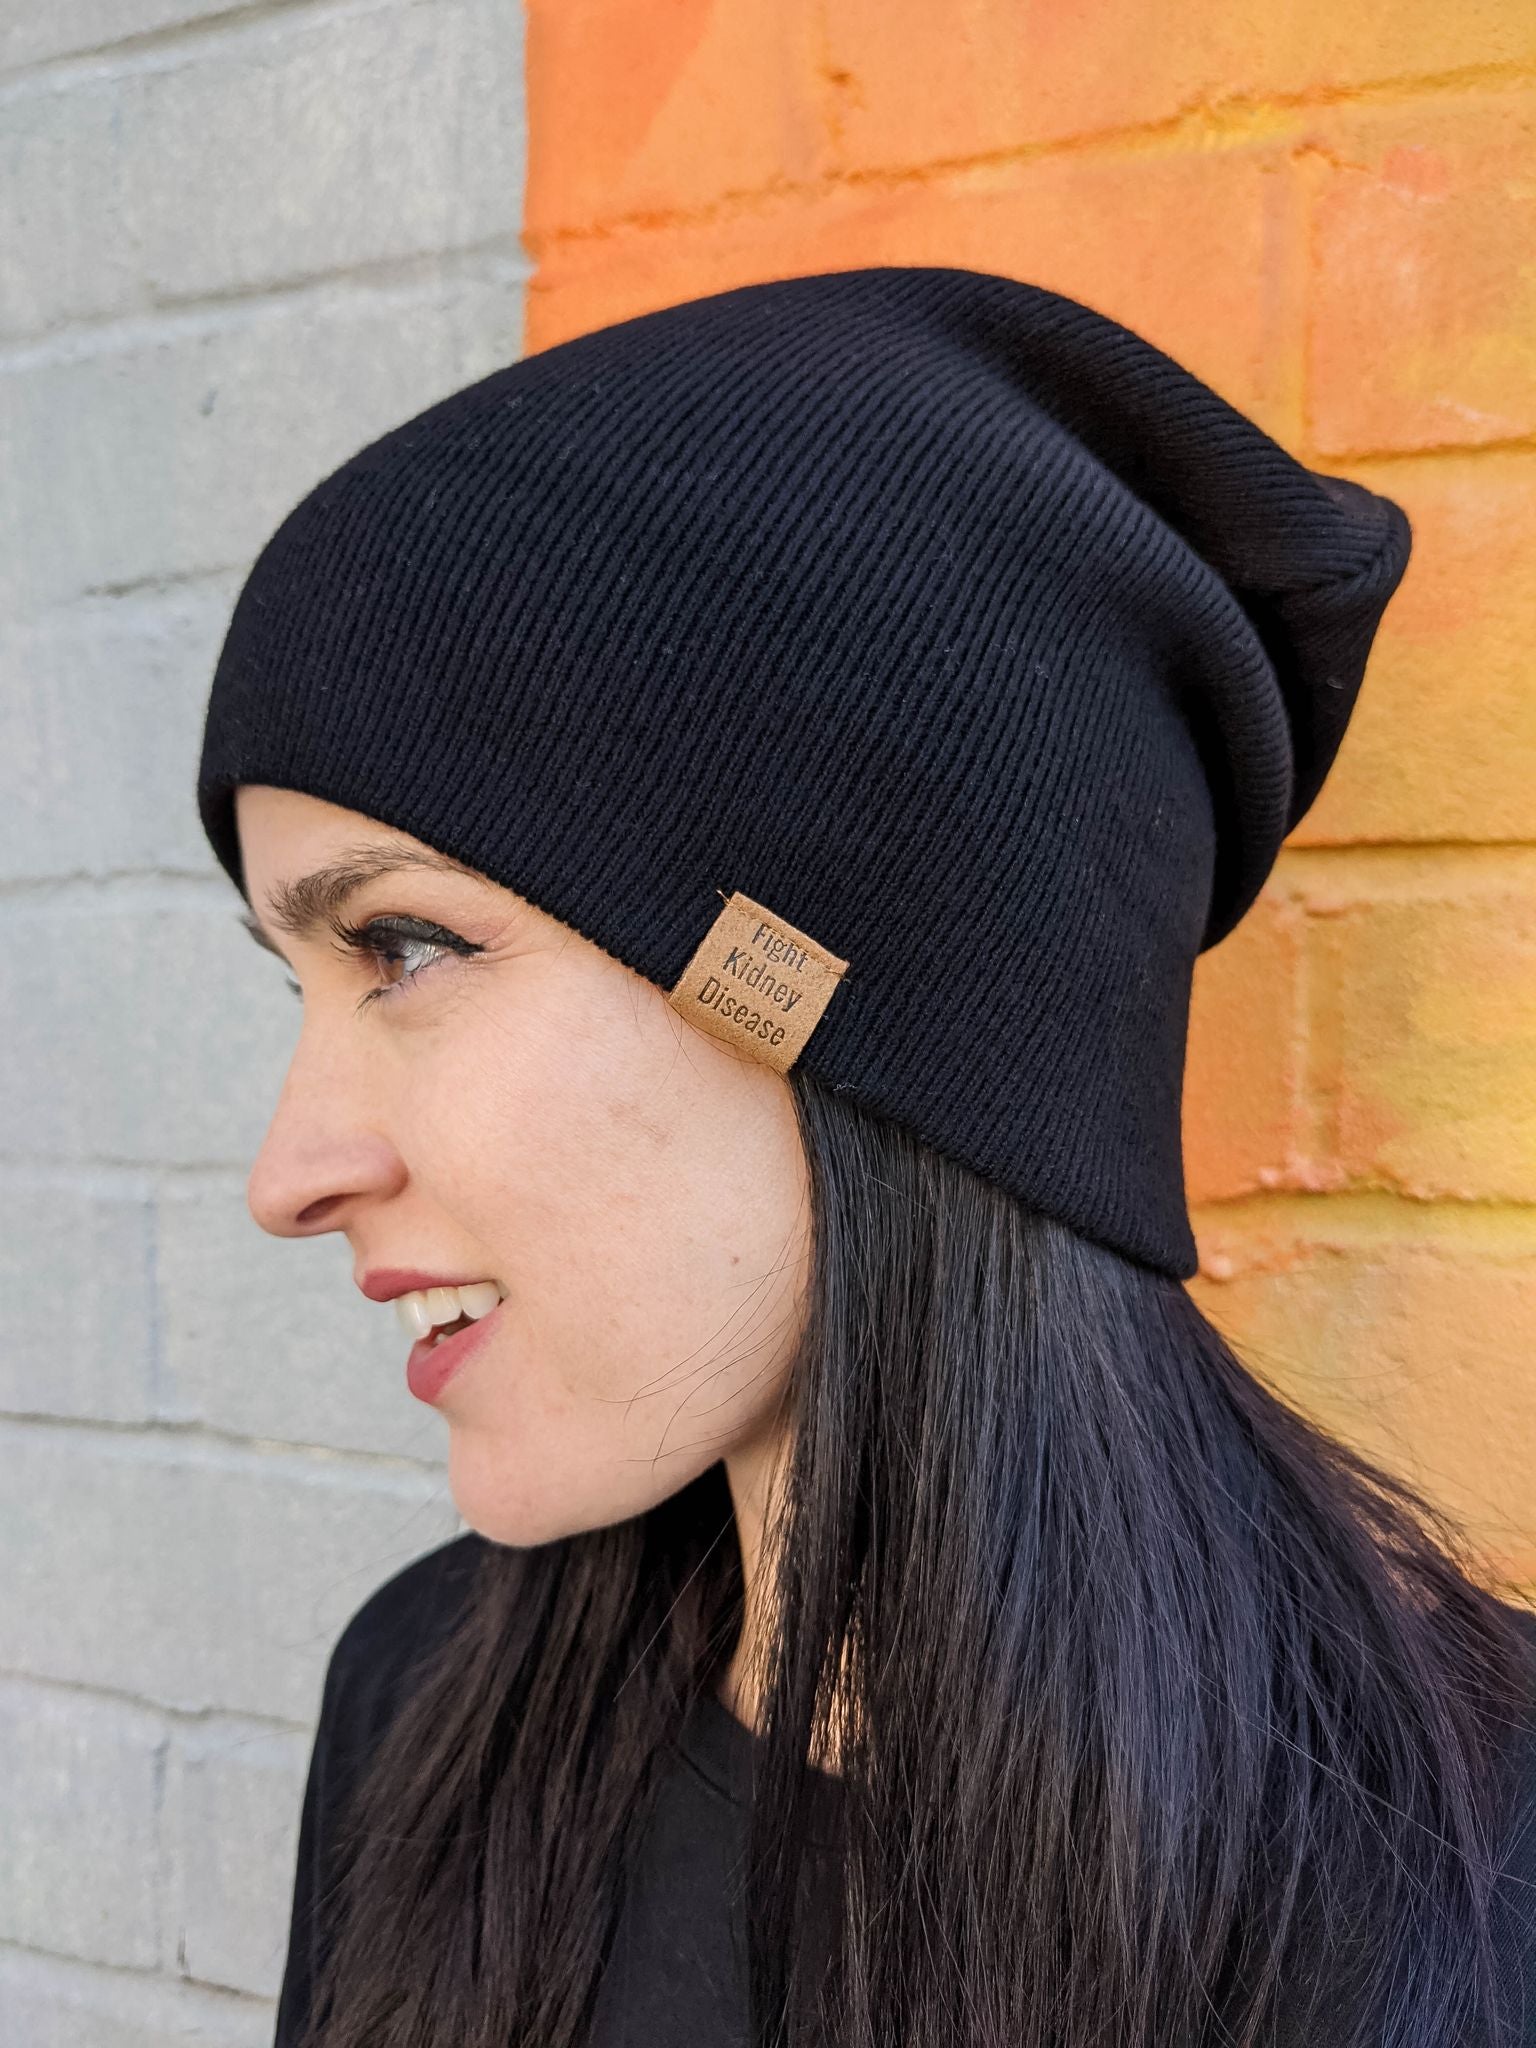 Dialysis Beanie for Men and Women with Printed Dialysis Warrior and Fight Kidney Disease